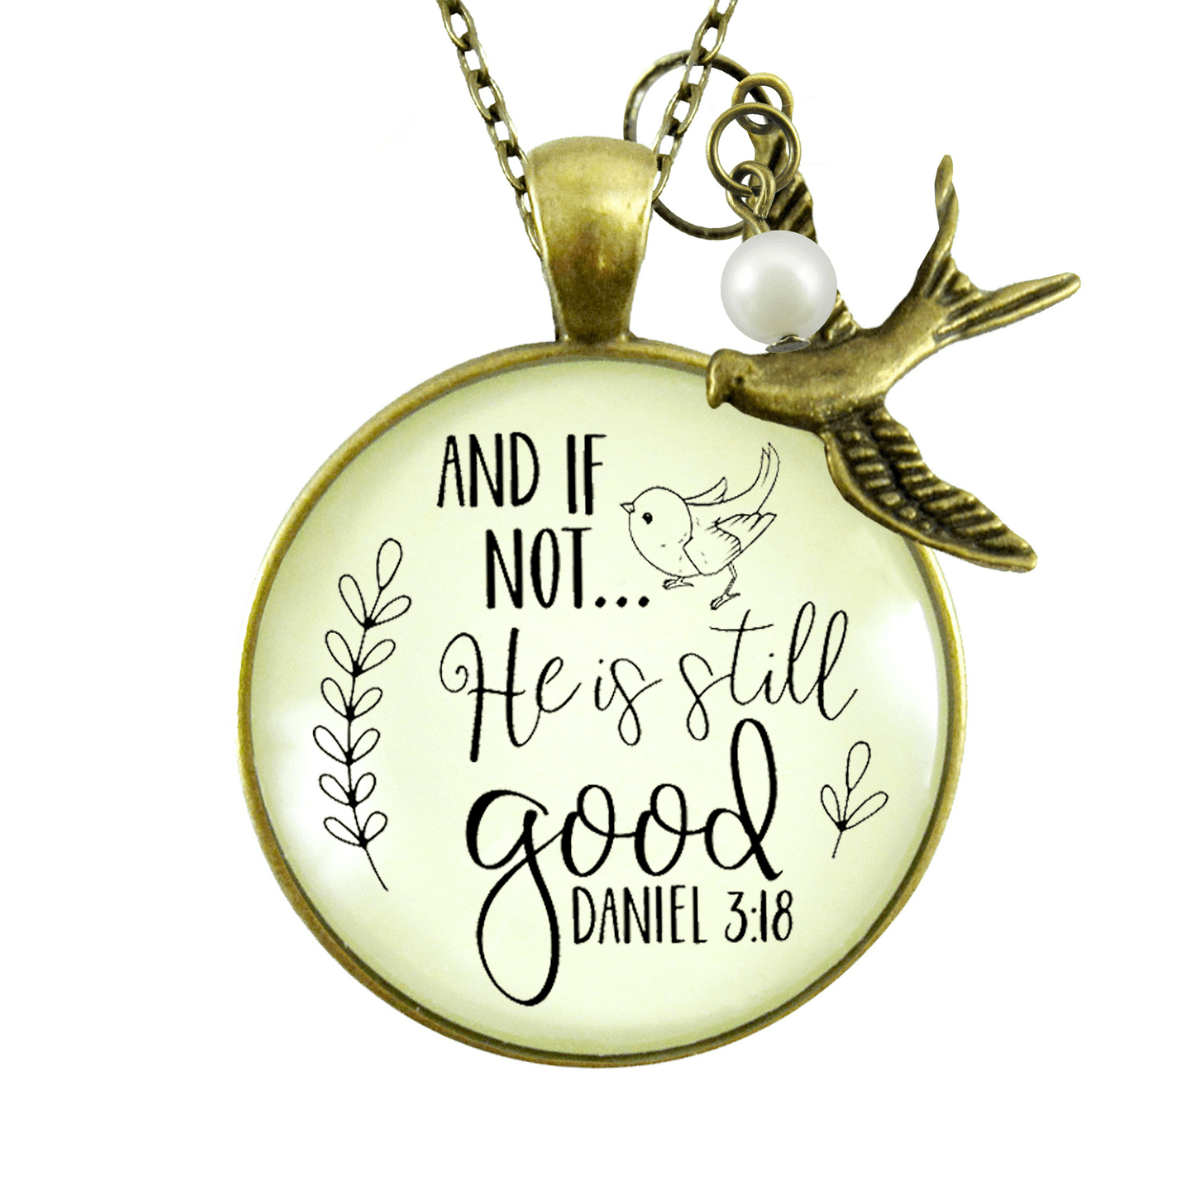 Gutsy Goodness If Not He is Still Good Necklace Grateful Religious Faith Jewelry - Gutsy Goodness Handmade Jewelry;If Not He Is Still Good Necklace Grateful Religious Faith Jewelry - Gutsy Goodness Handmade Jewelry Gifts